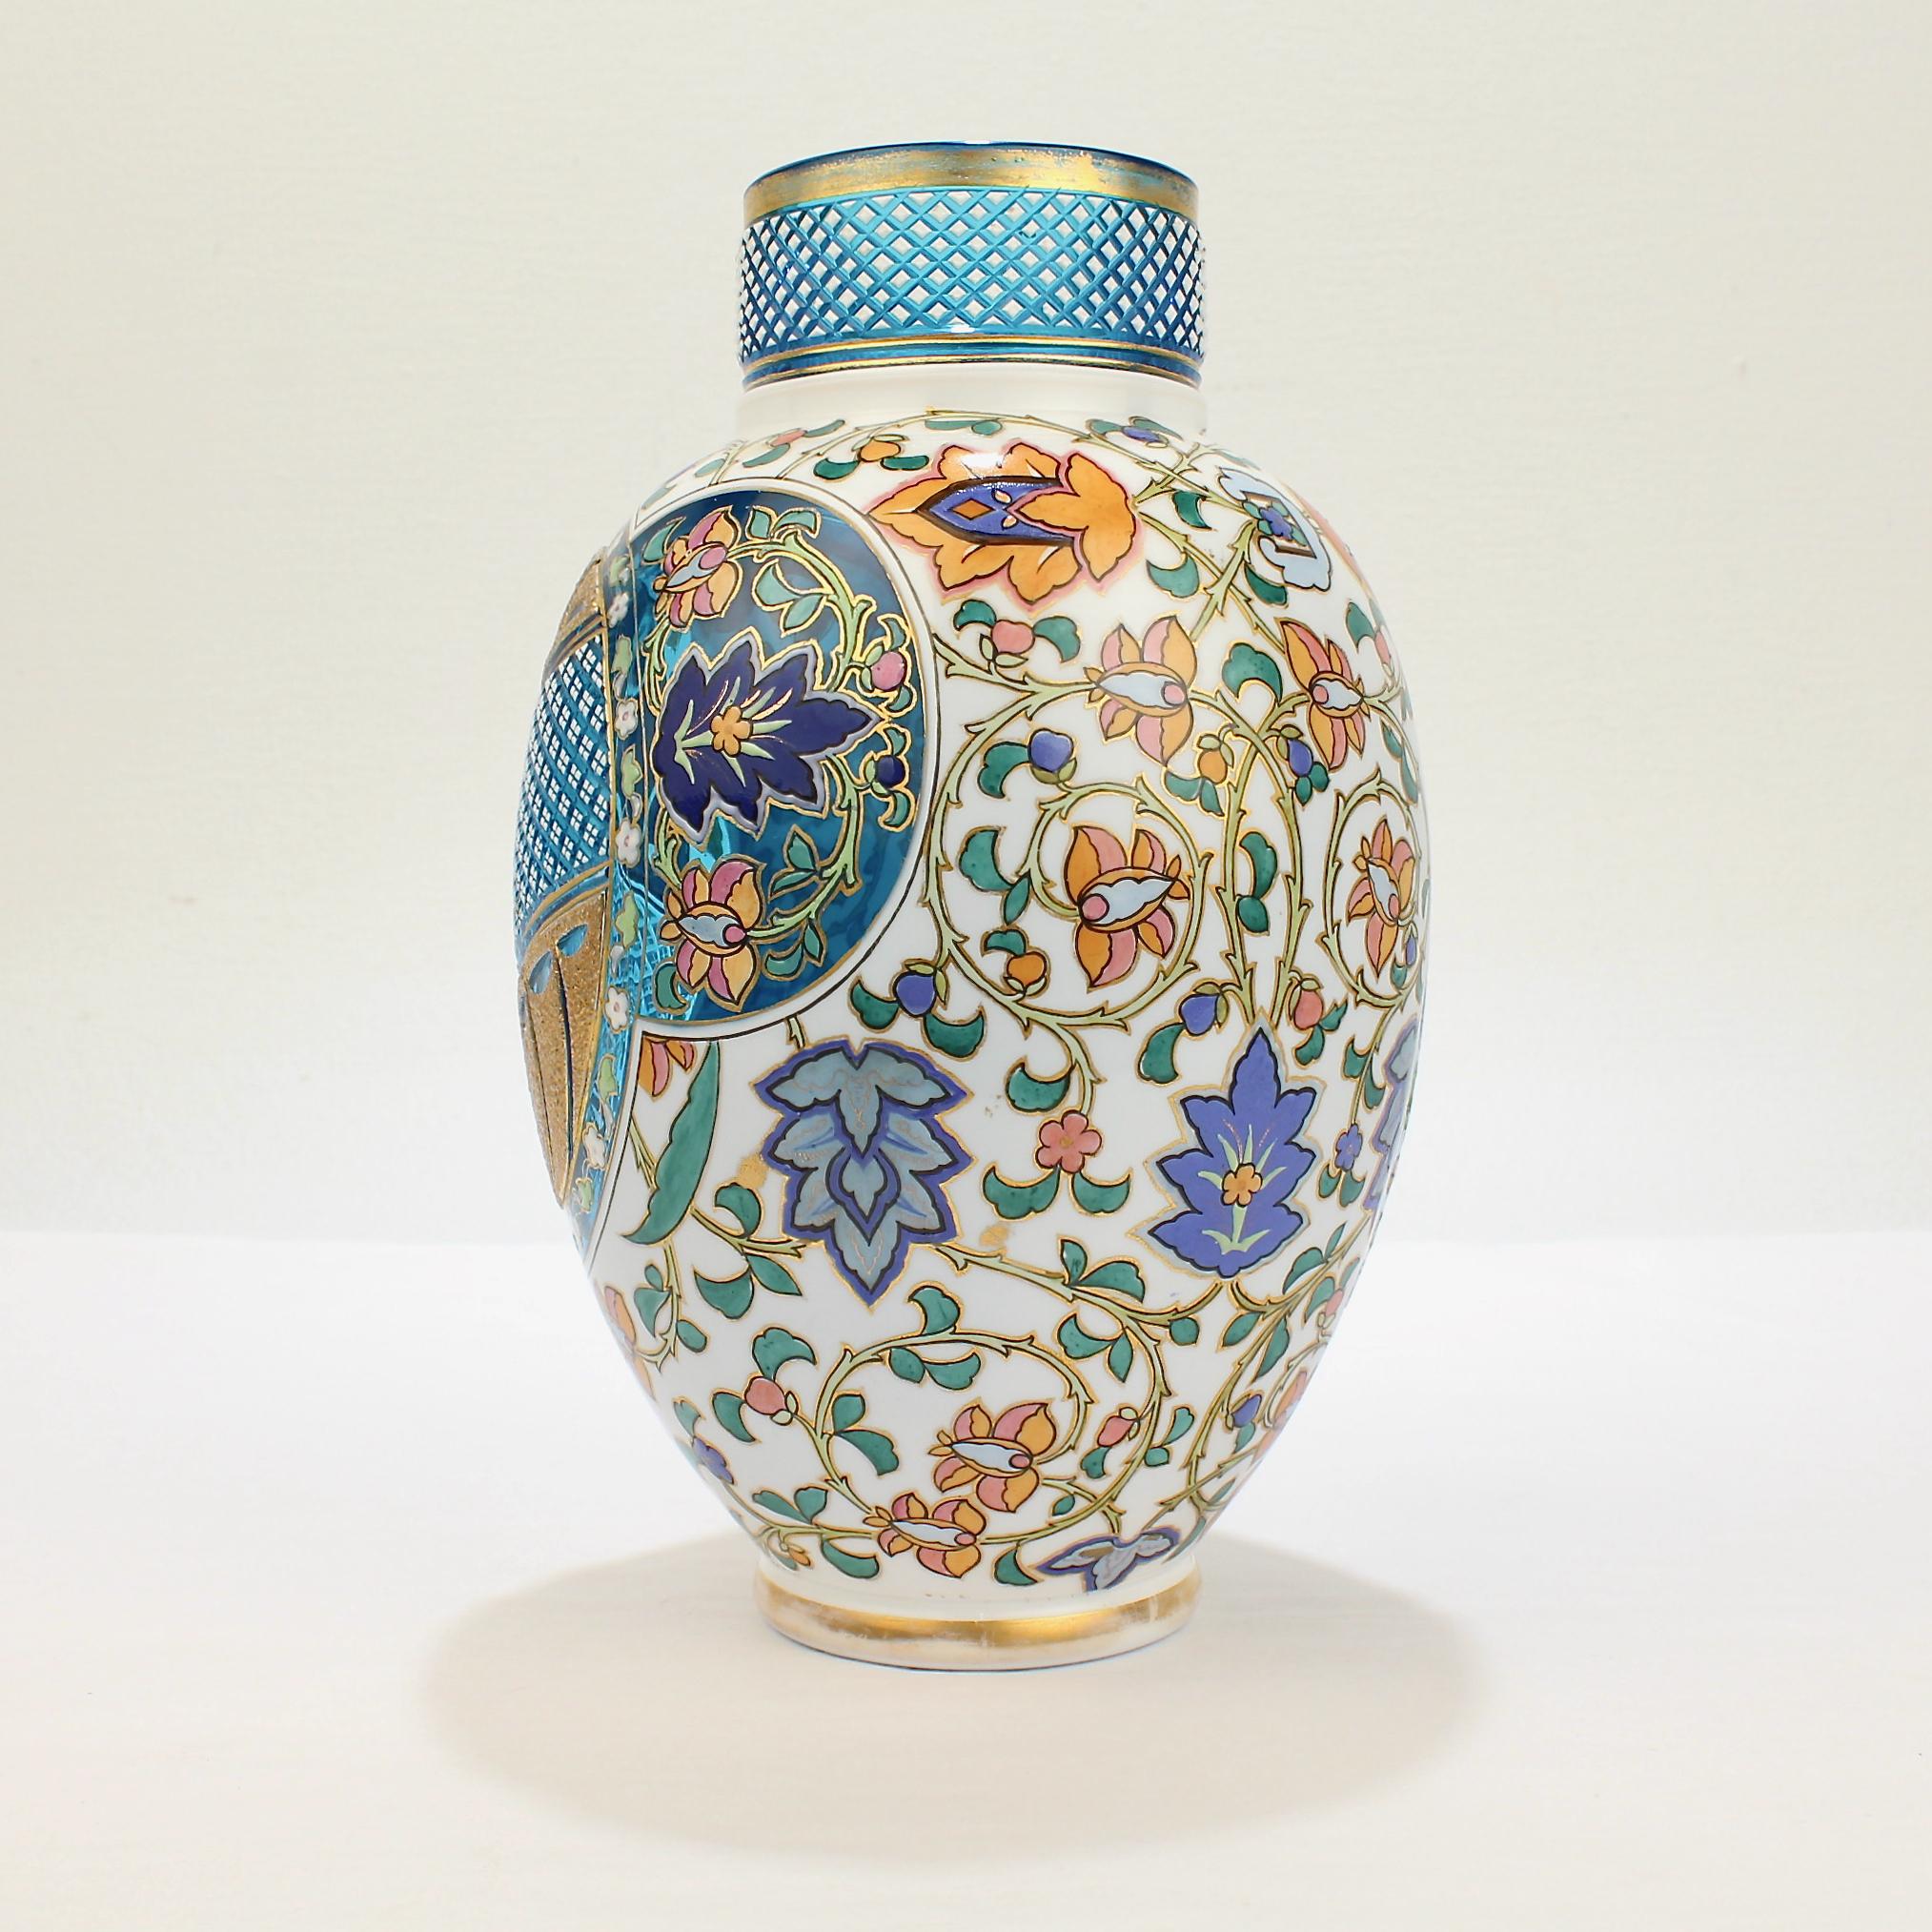 A very fine Bohemian aesthetic period enameled and cut-to-clear art glass vase.

In two colors with a white cased top layer cut to reveal a blue ground in the style of the Moser or Josephinenhütte factories.

With diamond cuts, enamel stylized